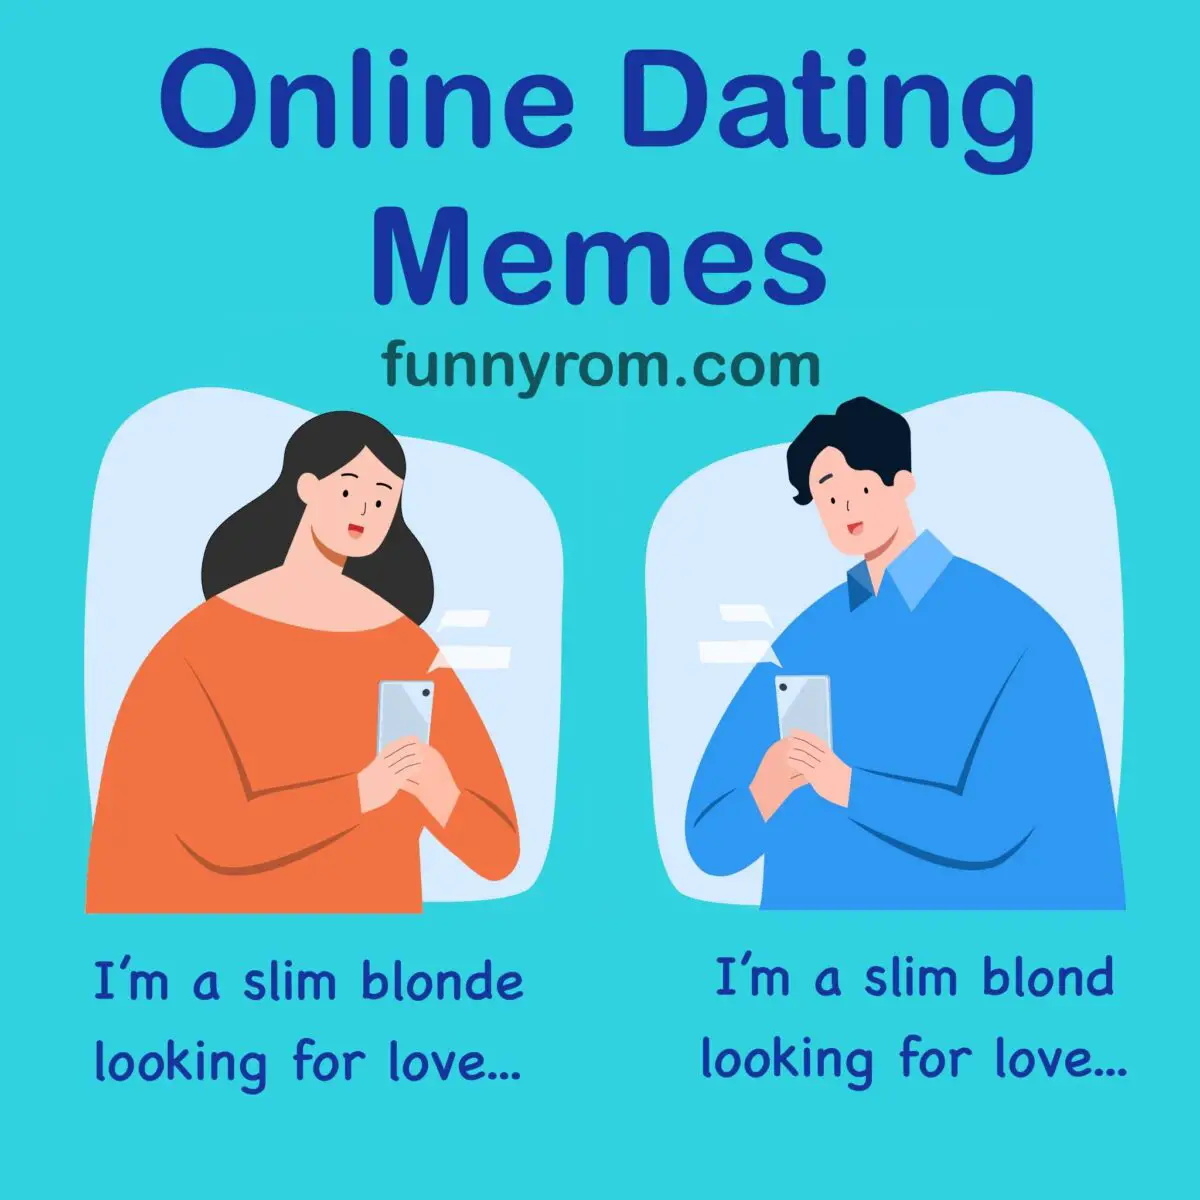 Best Memes About Online Dating That You Will Relate To